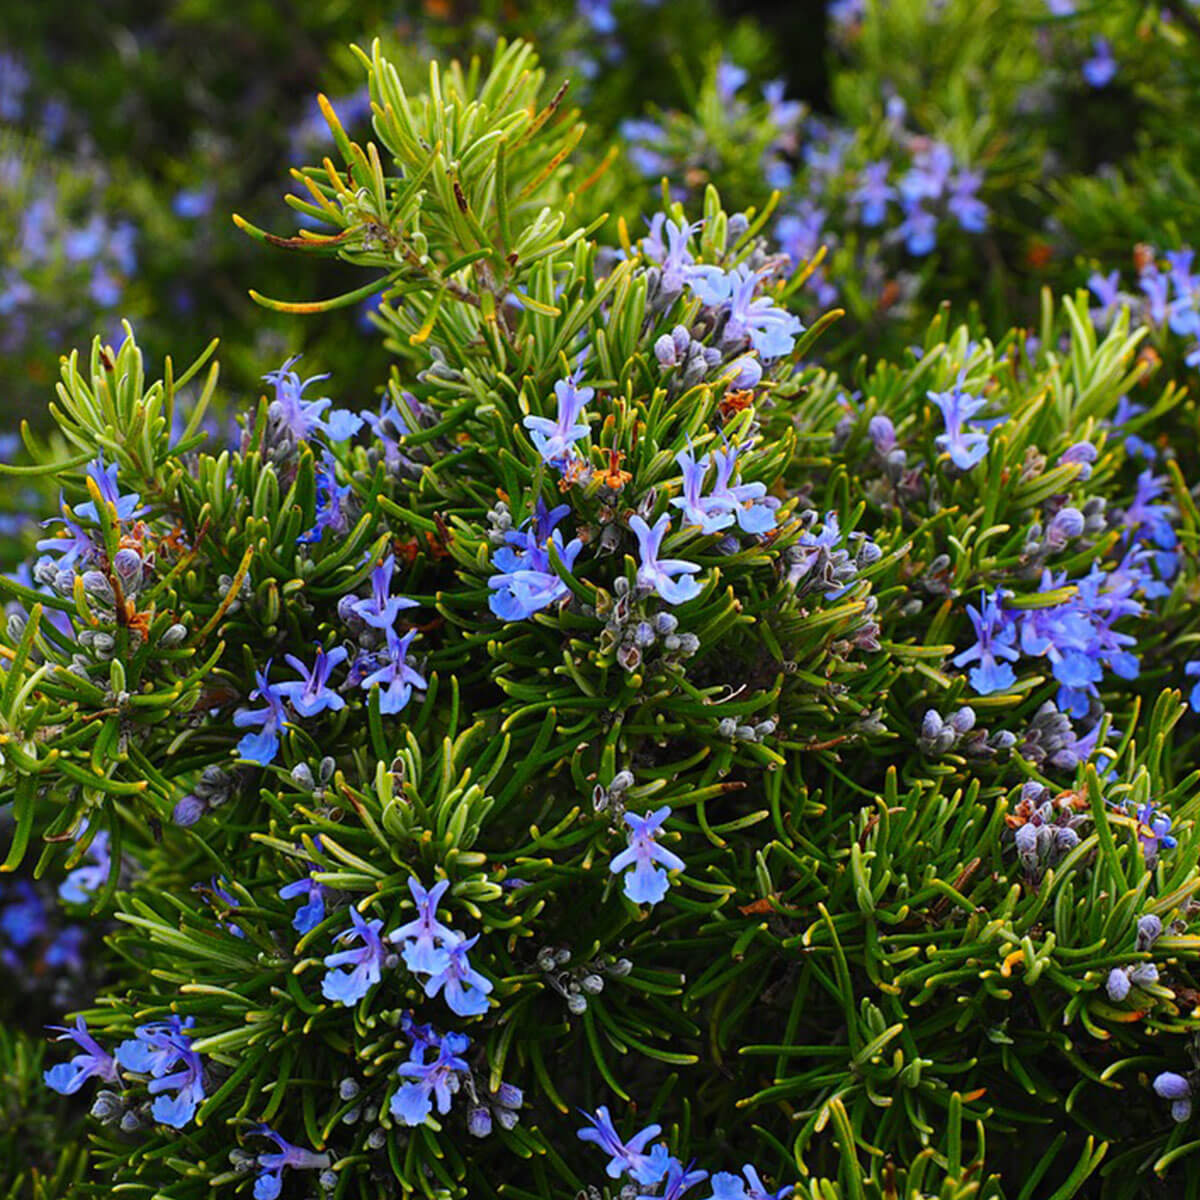 many sources say rosemary is under the auspices of the sun. this makes good sense to me. rosemary is warming, drying, and moves blood in the body, connecting the parts to the whole and offering nourishment and vital energy.